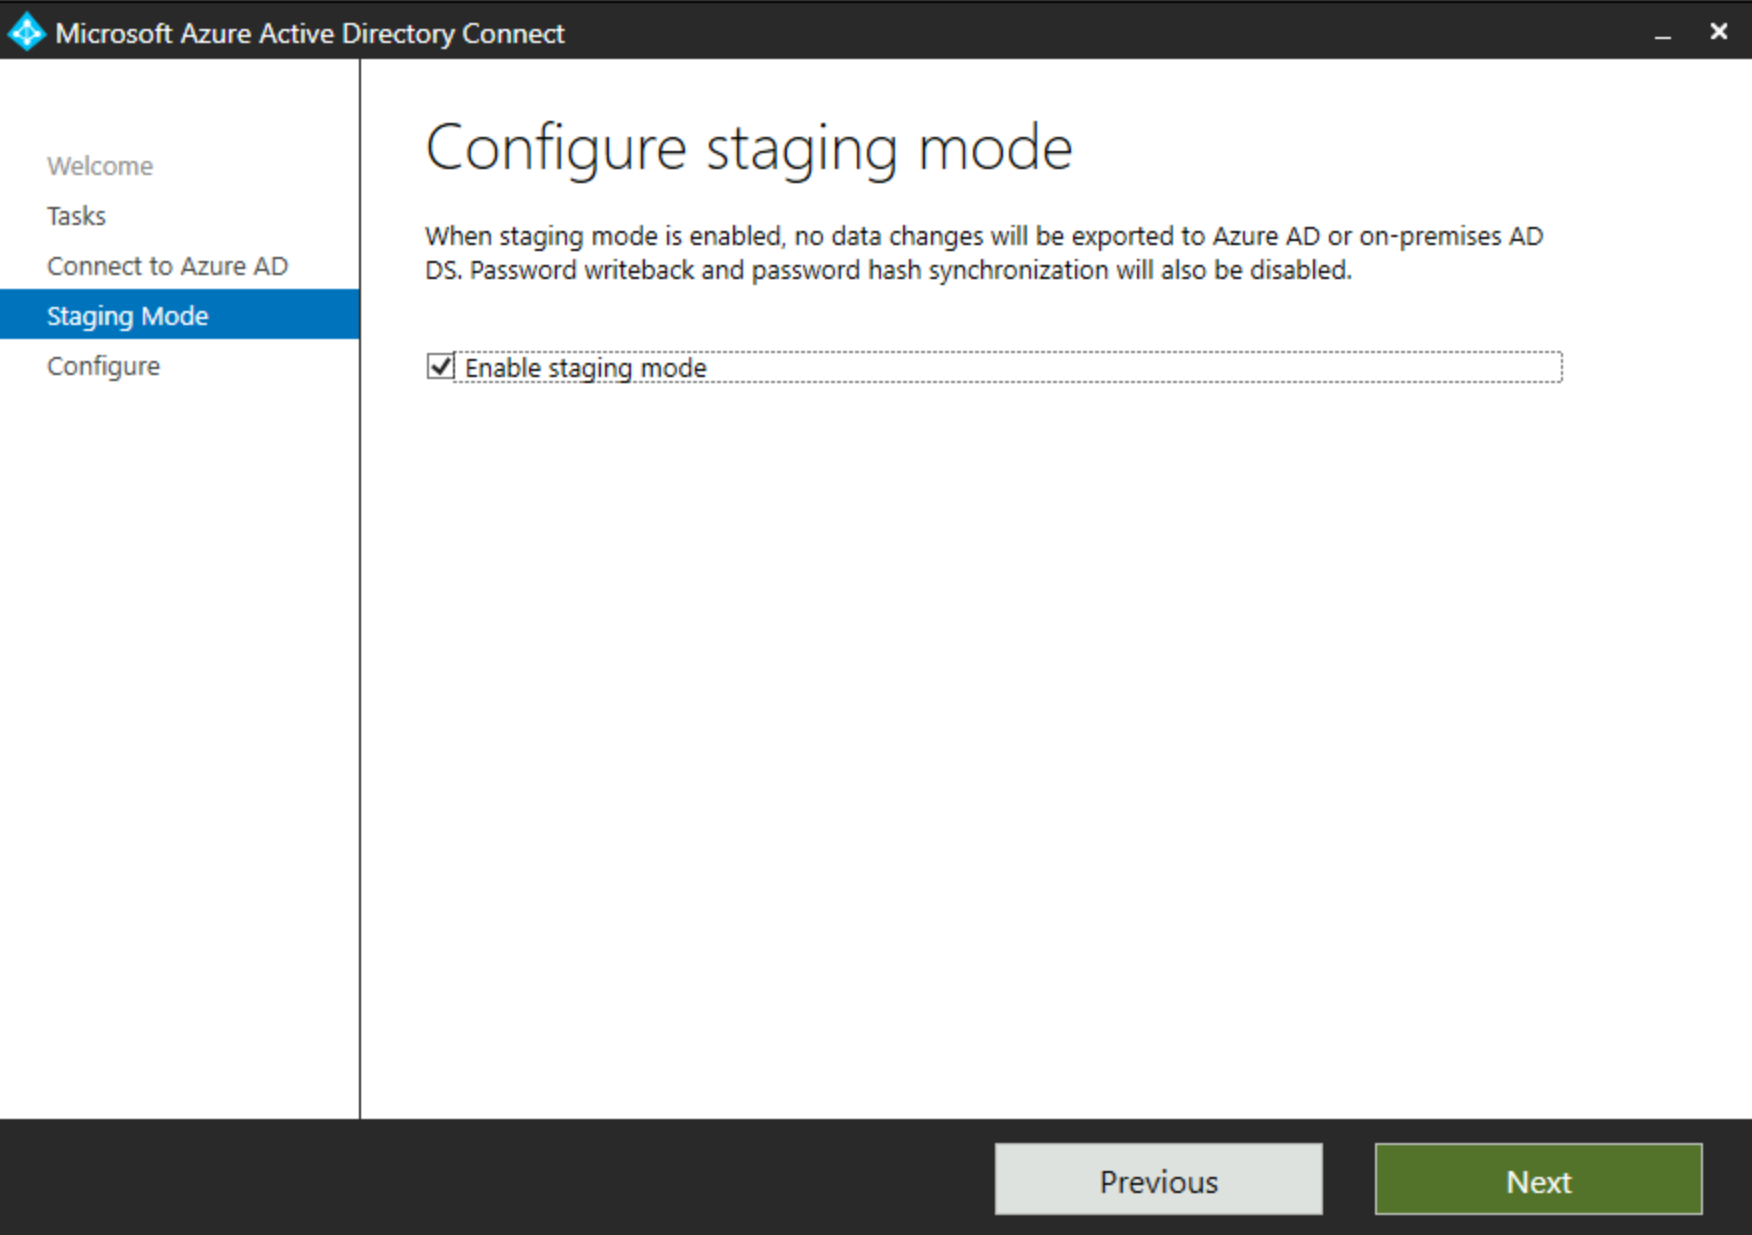 Screenshot shows Staging Mode configuration in the Active Azure AD Connect dialog box.